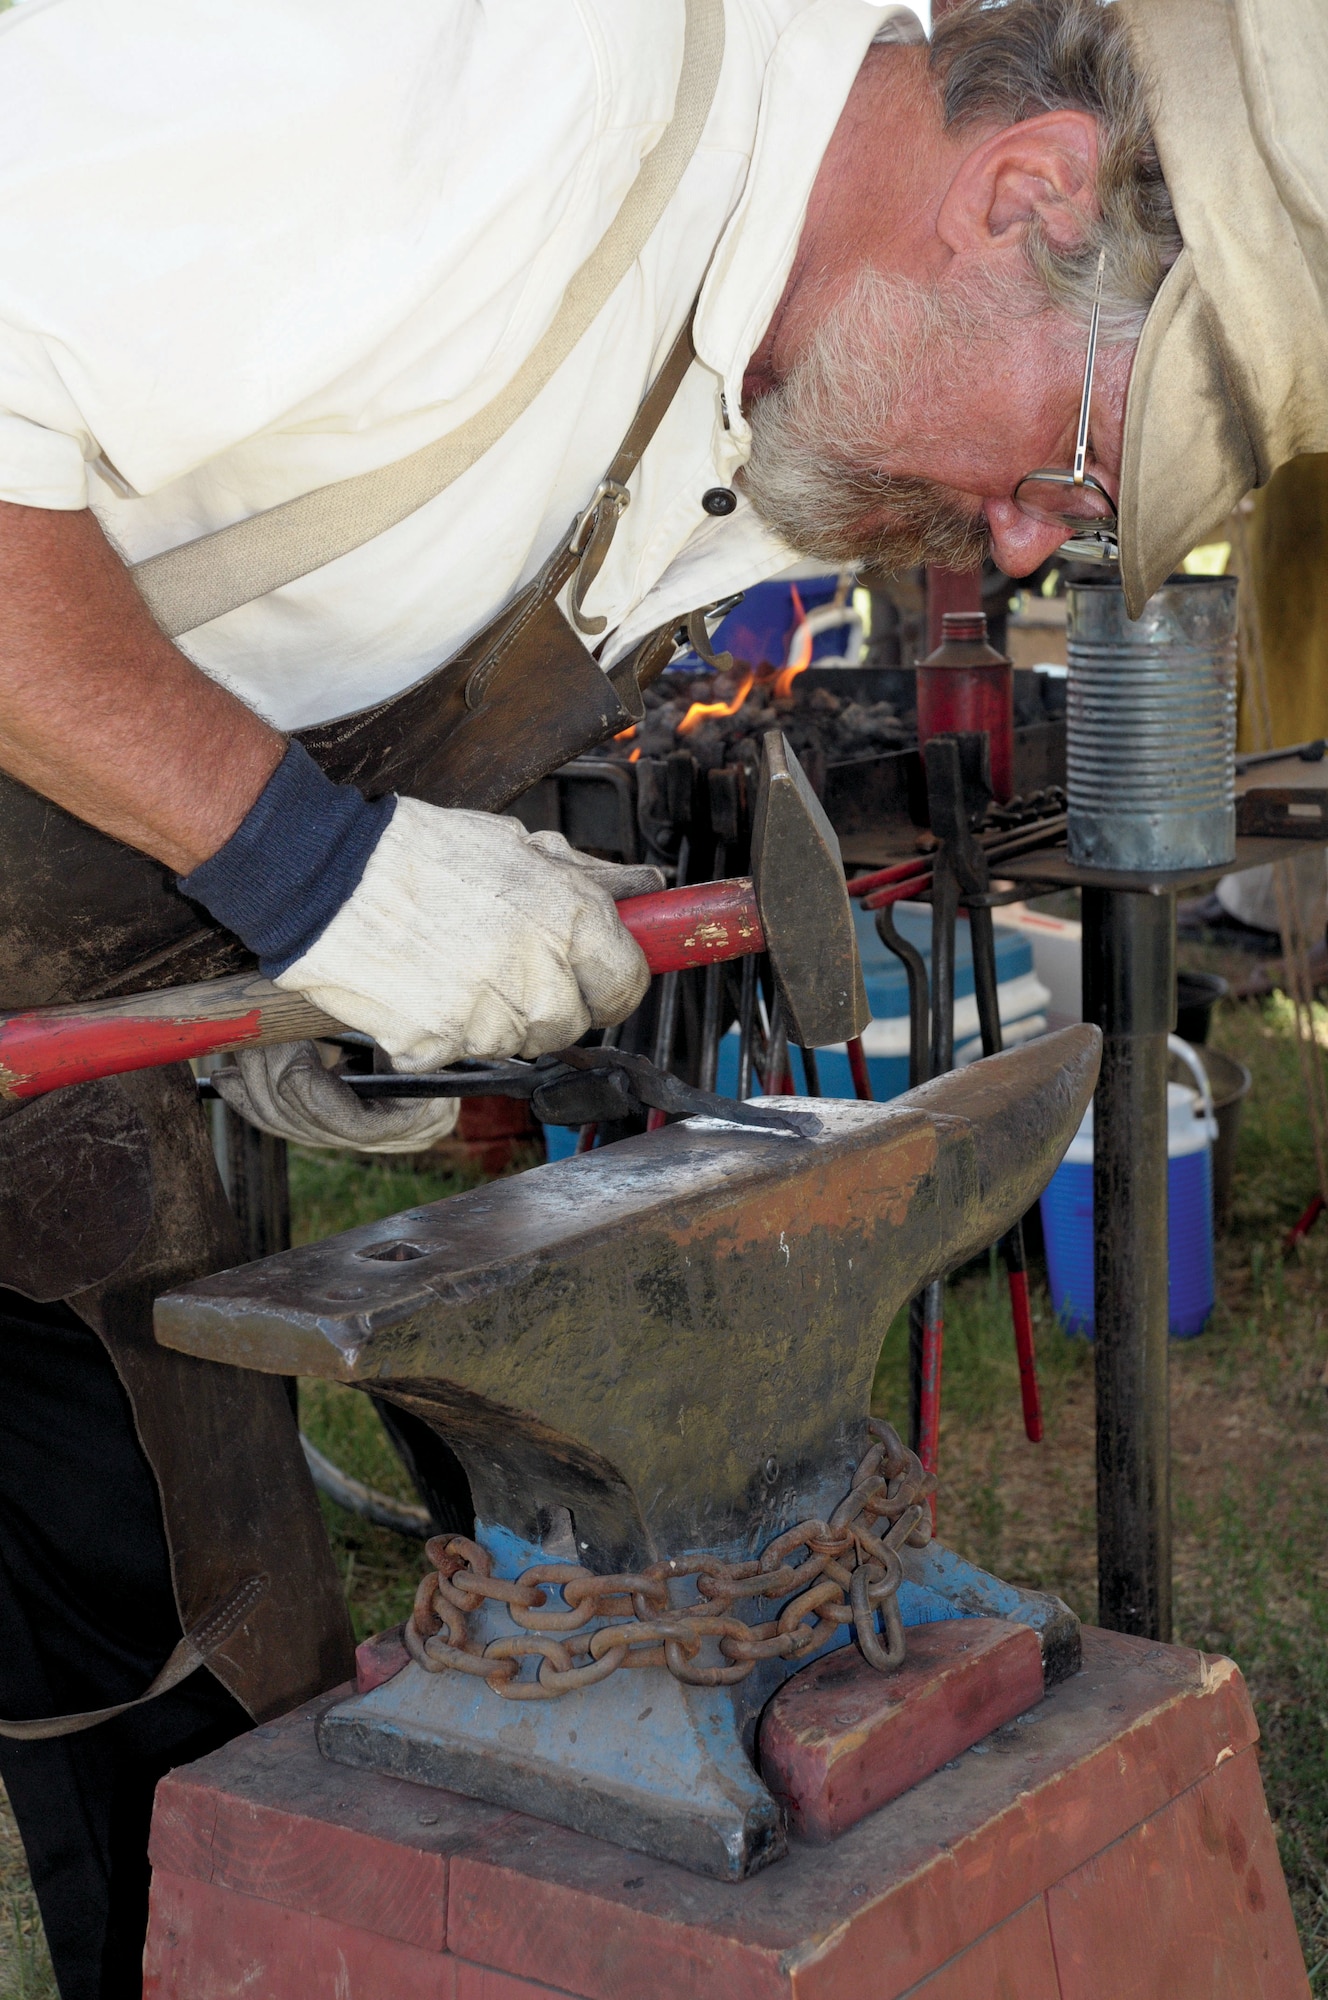 Jan Manning from Fort Collins, Colo., demonstrates the techniques of a blacksmith during Fort D.A. Russell Days here July 23. (U.S. Air Force photo by Blaze Lipowski)